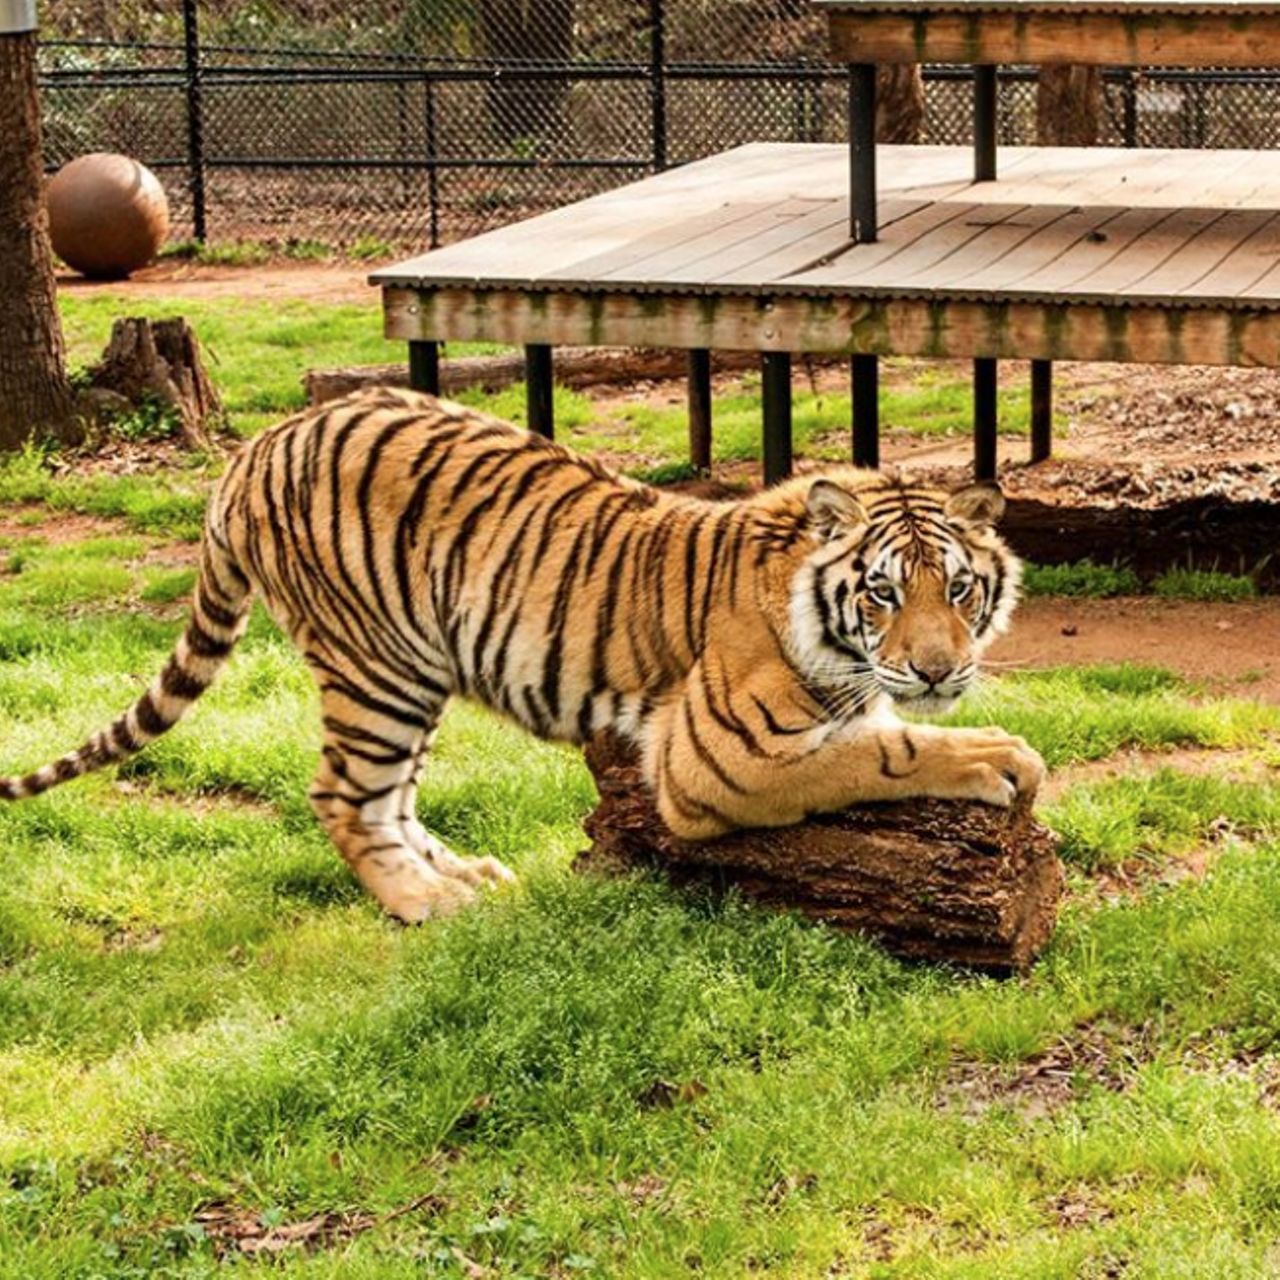 Tiger Creek Wildlife Refuge
17552 FM 14, Tyler, (903) 858-1008
Love cats? You’ll find some big ones here at the 150-acre refuge. Home to more than 40 rescued tigers and other wild cats that have been abused, neglected or displaced, Tiger Creek lets you learn more about these majestic animals up close – safely, of course.
Photo via Instagram / tiger_creek